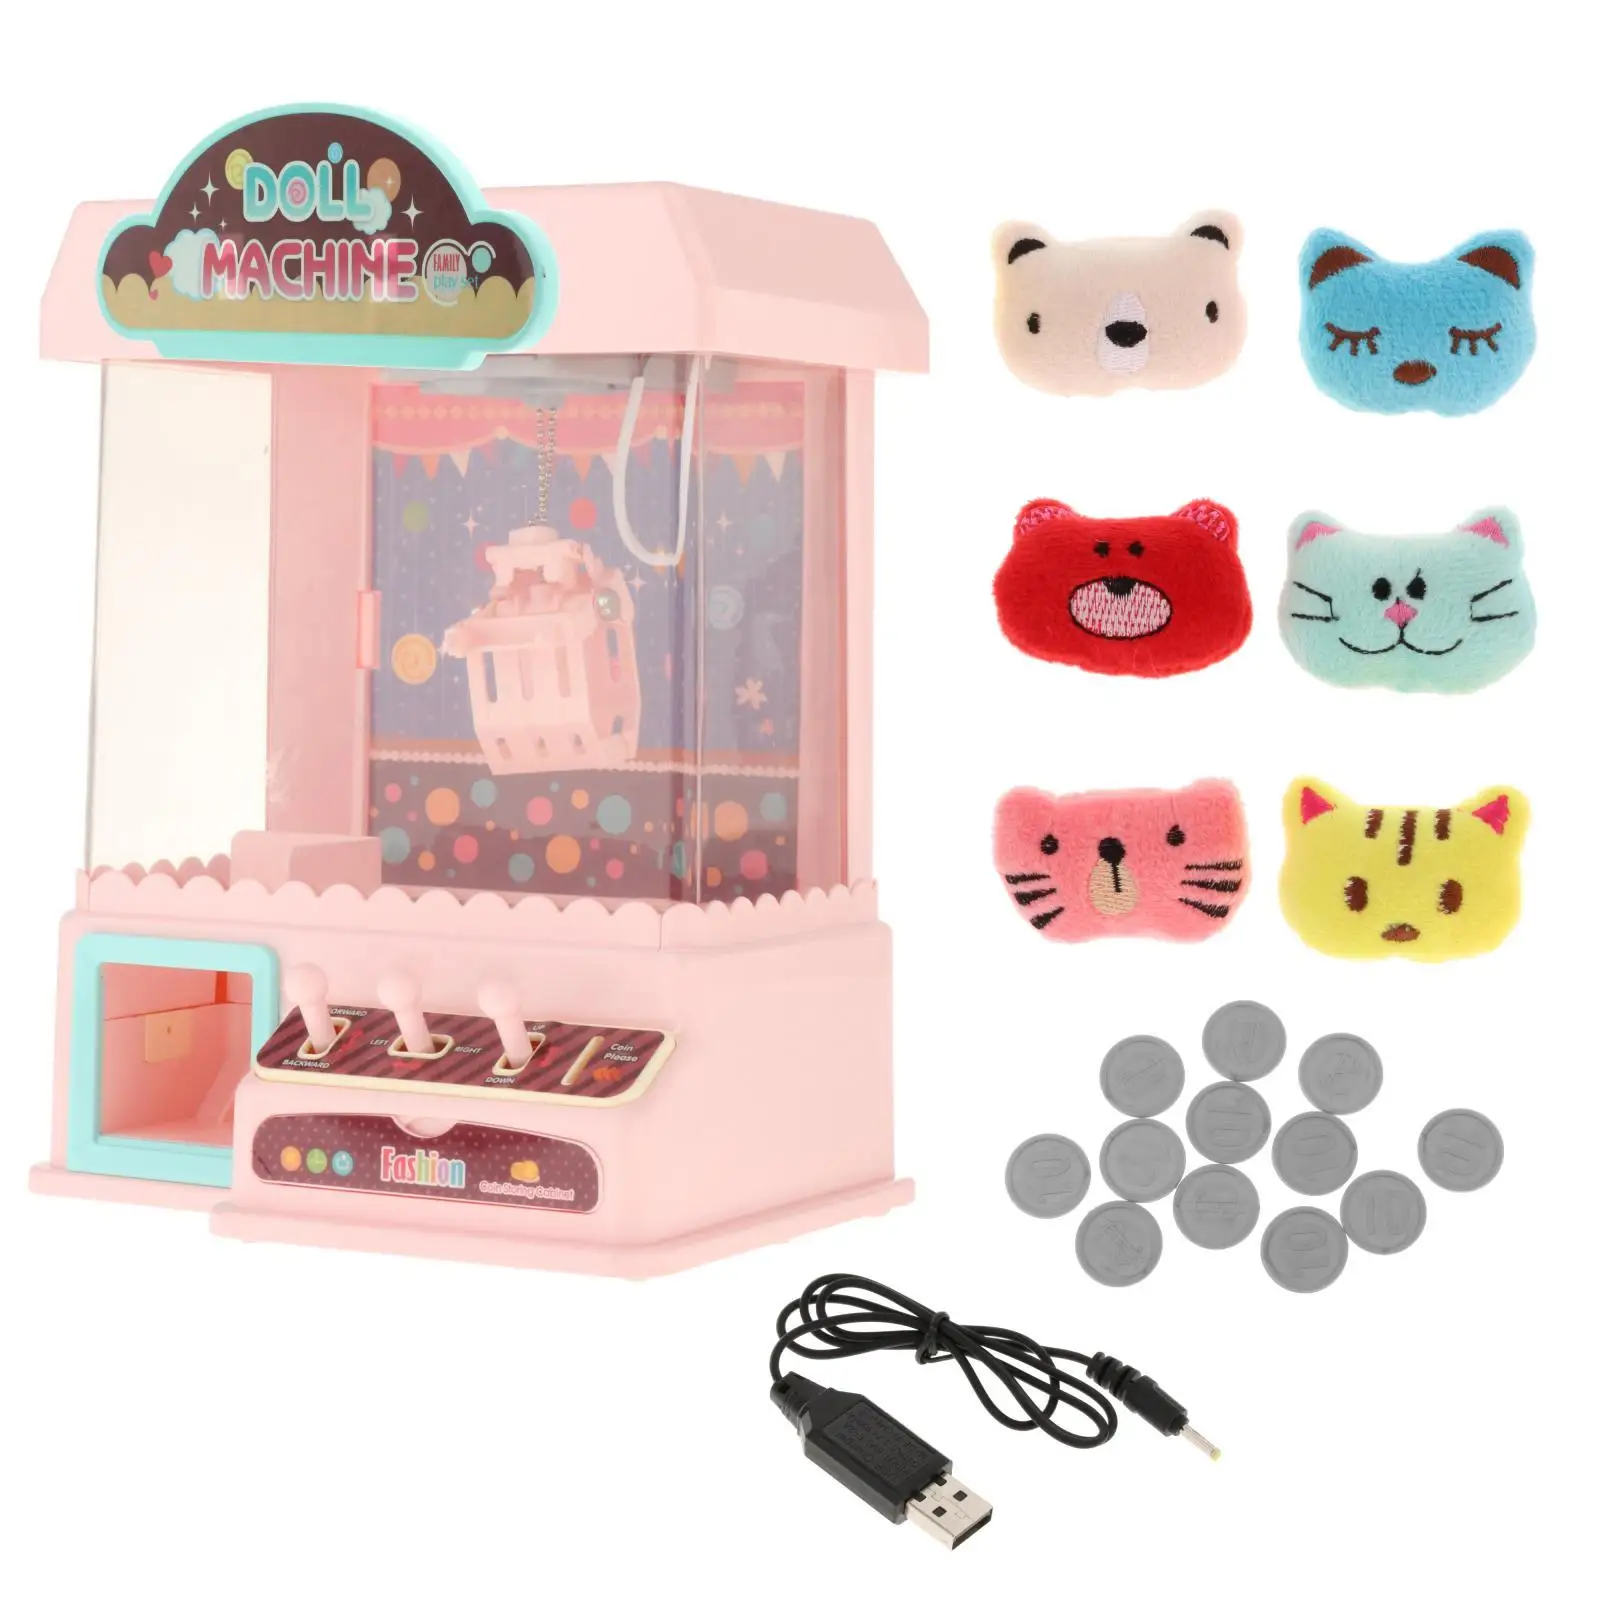 Vending Grabber Machine Claw Machine with 6 Dolls for Kids Birthday Gifts